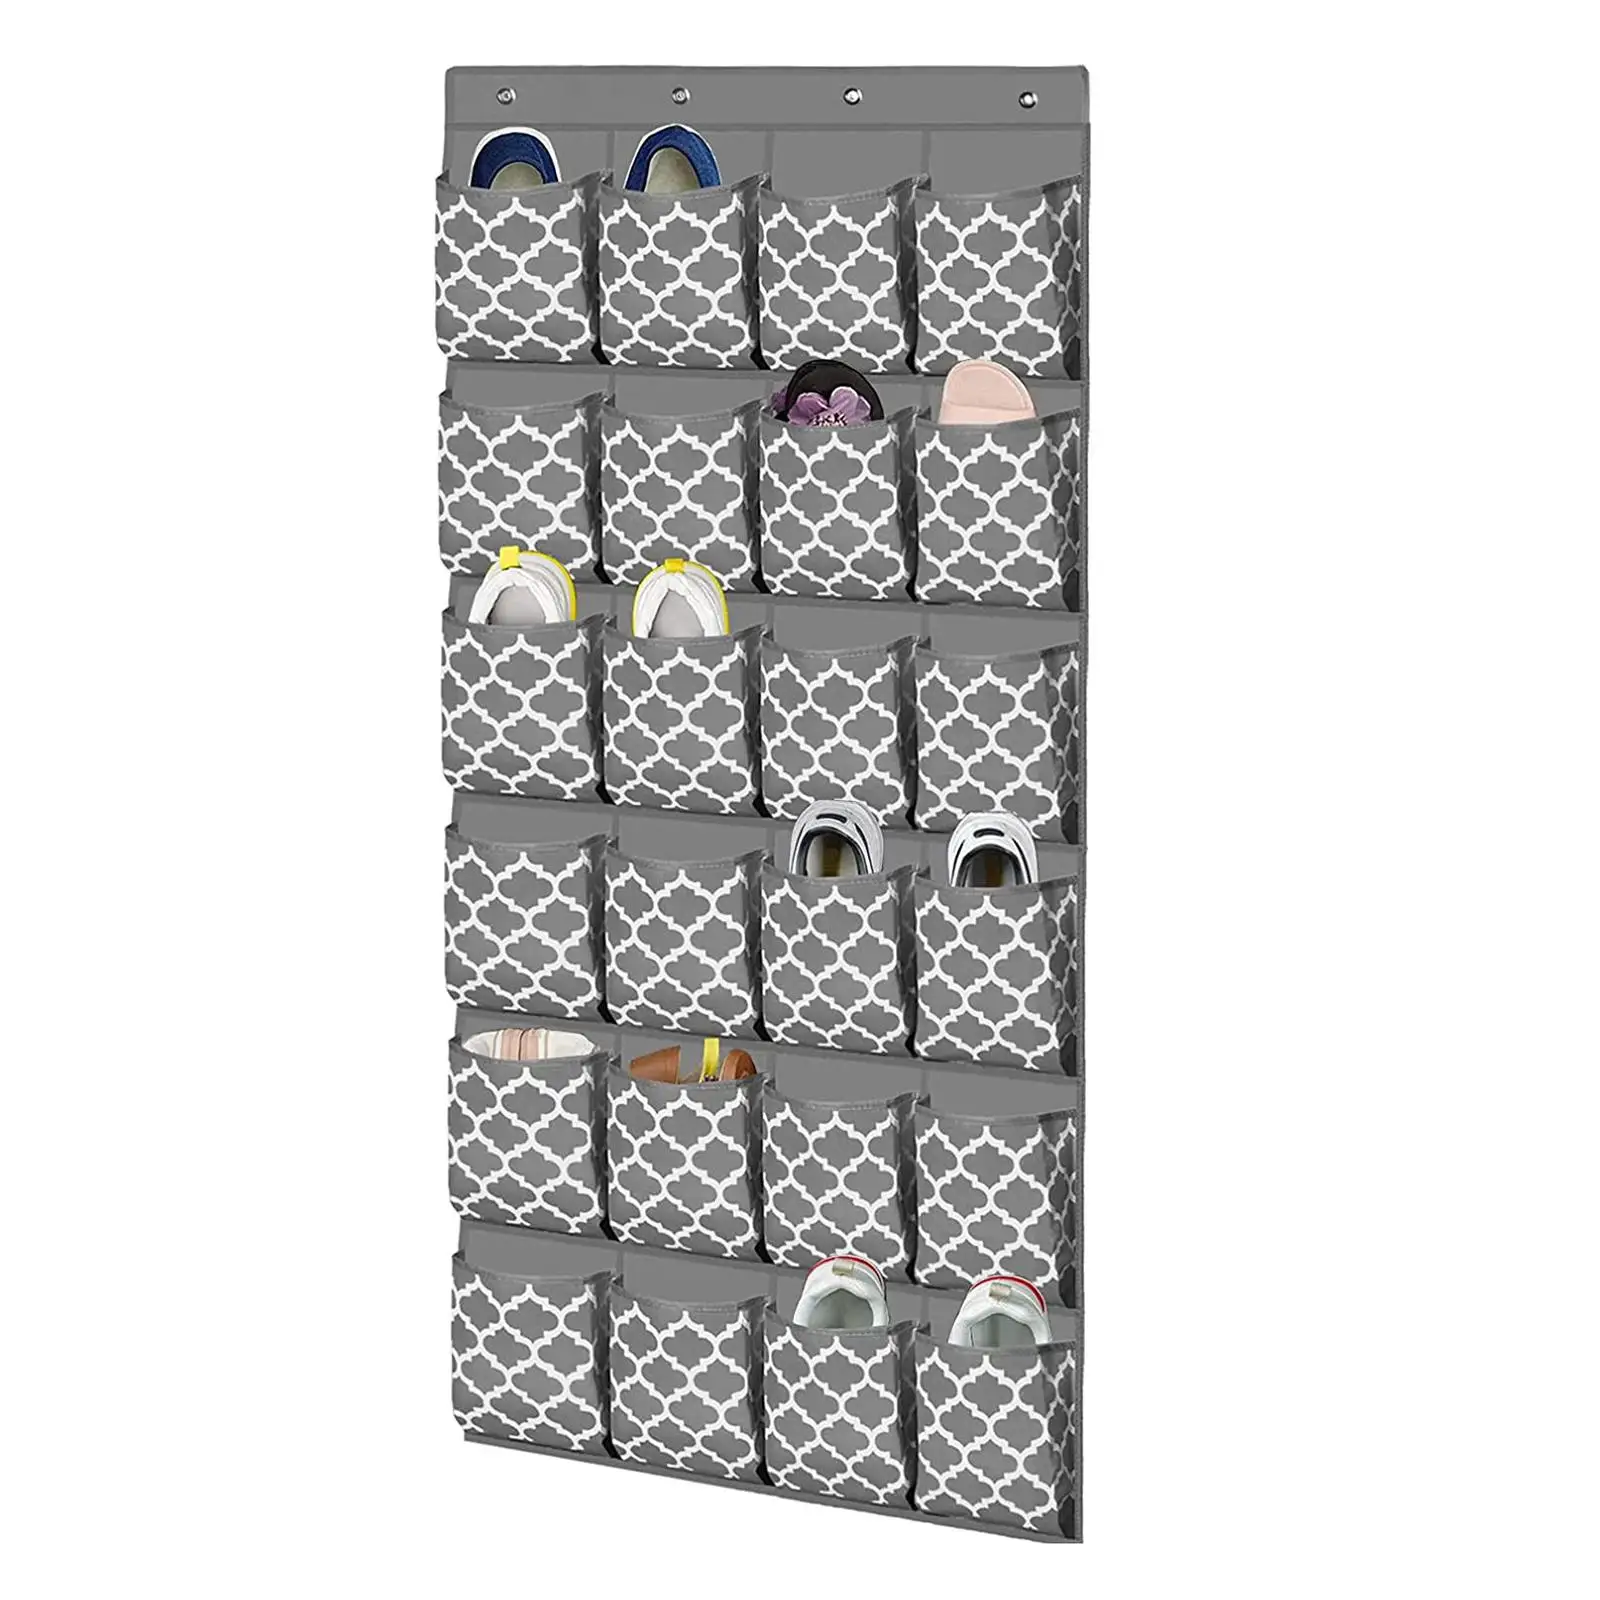 Over The Door Hanging Shoe Storage Rack Holder 24 Pouches 4 Hooks Convenient for Travelling